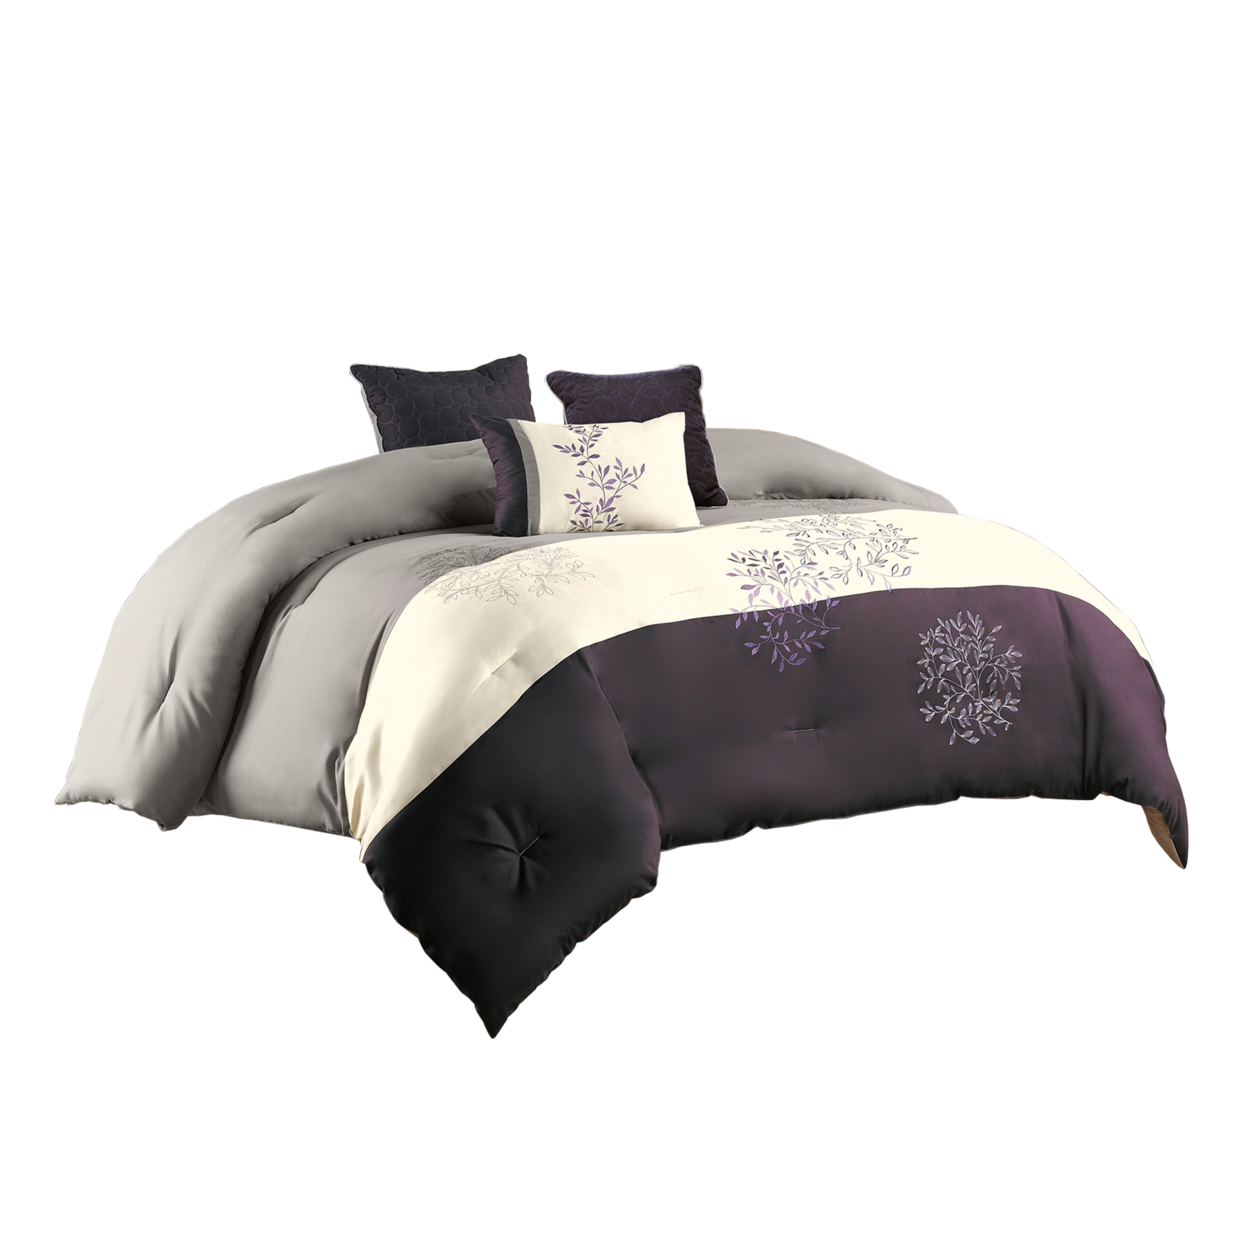 7 Piece Queen Polyester Comforter Set With Leaf Embroidery, Gray And Purple- Saltoro Sherpi